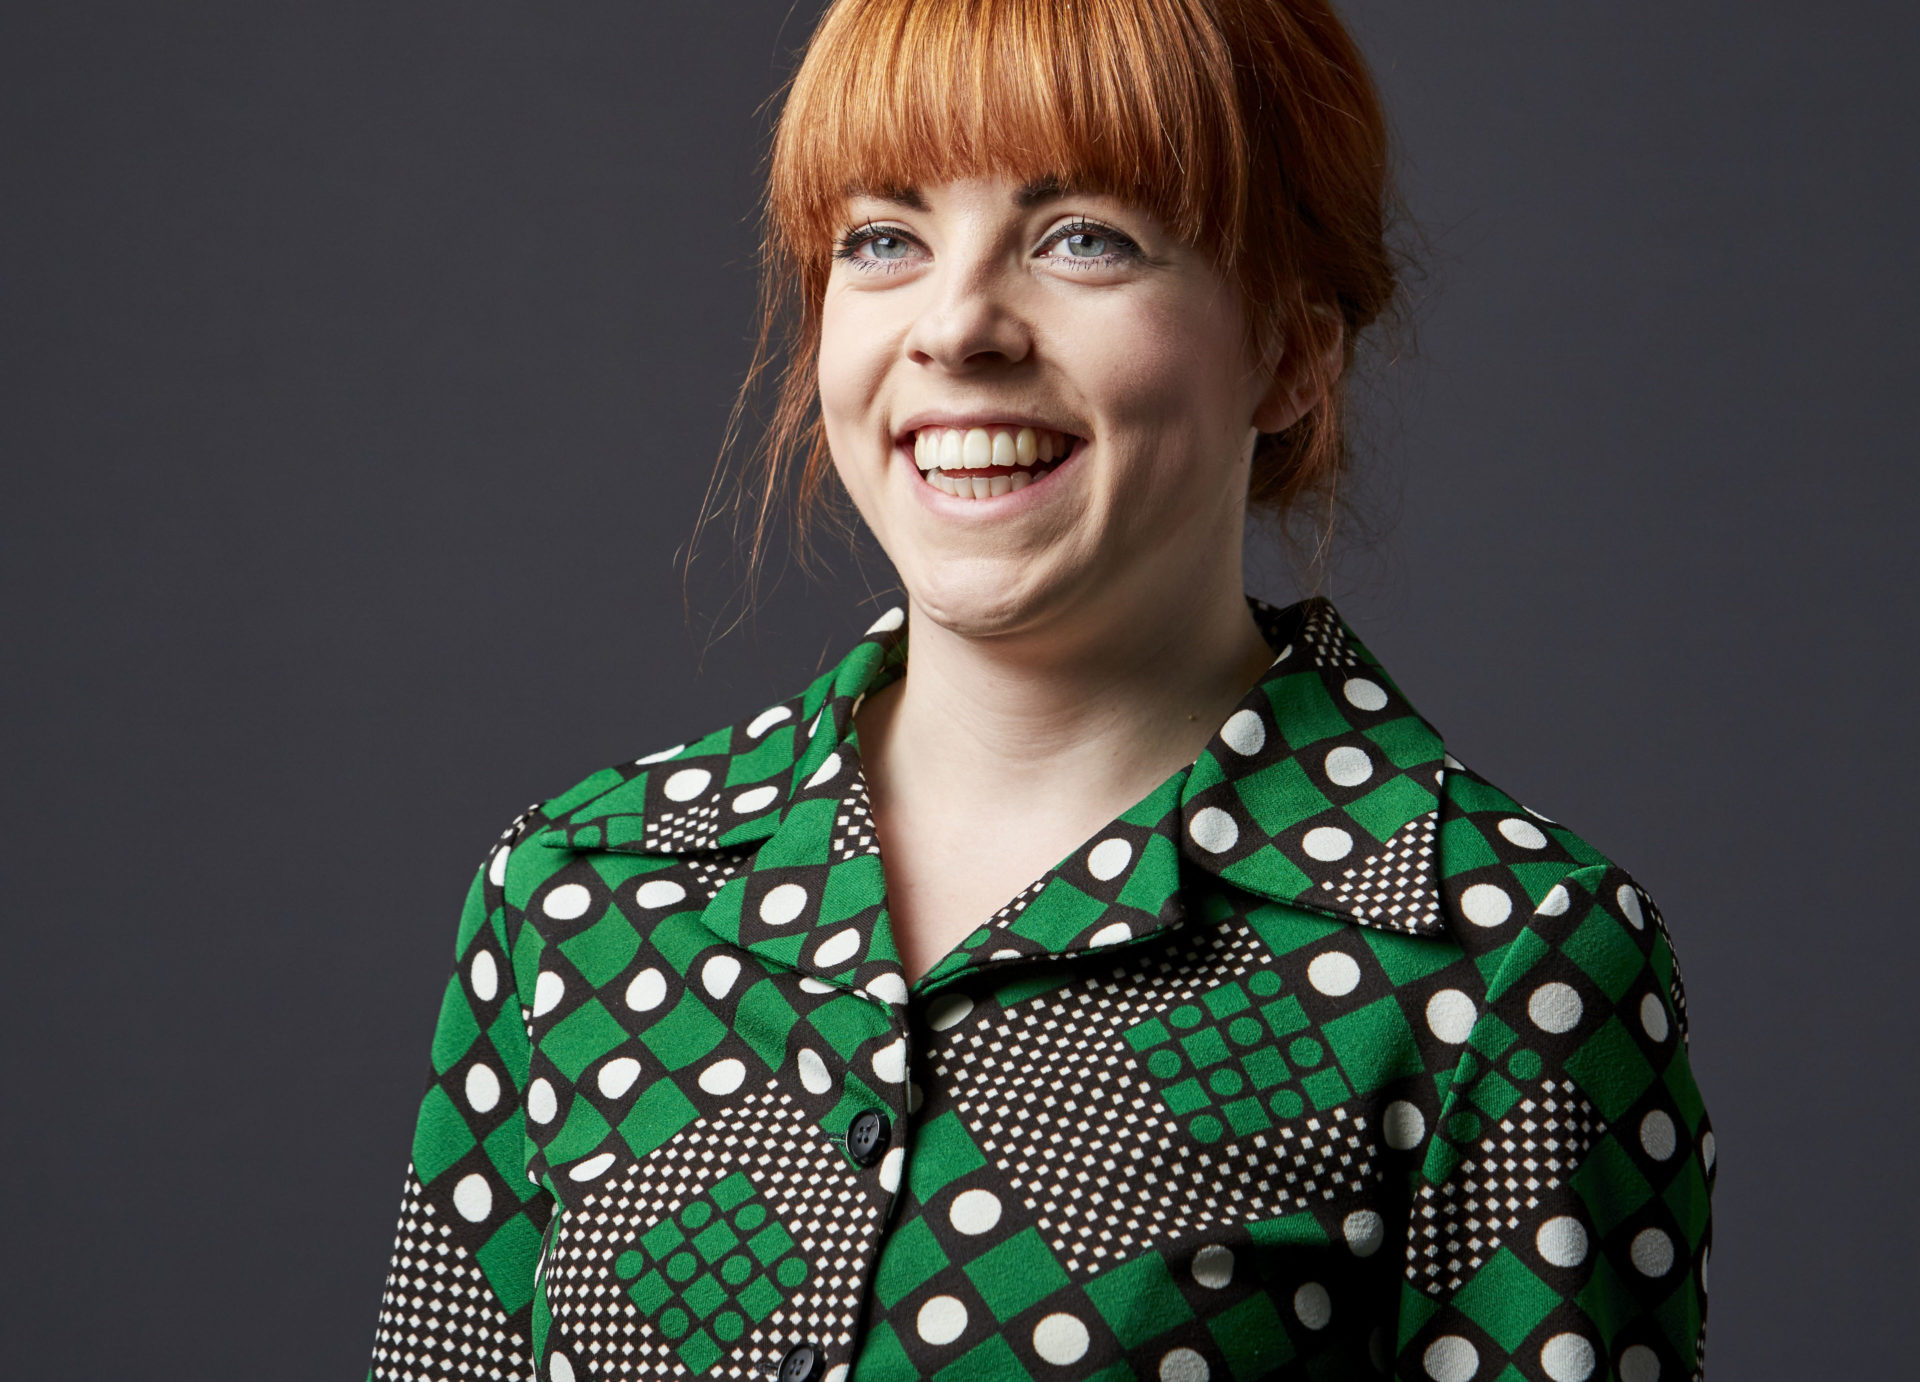 The picture shows a red headed woman, wearing a green, black and white shirt, smiling.